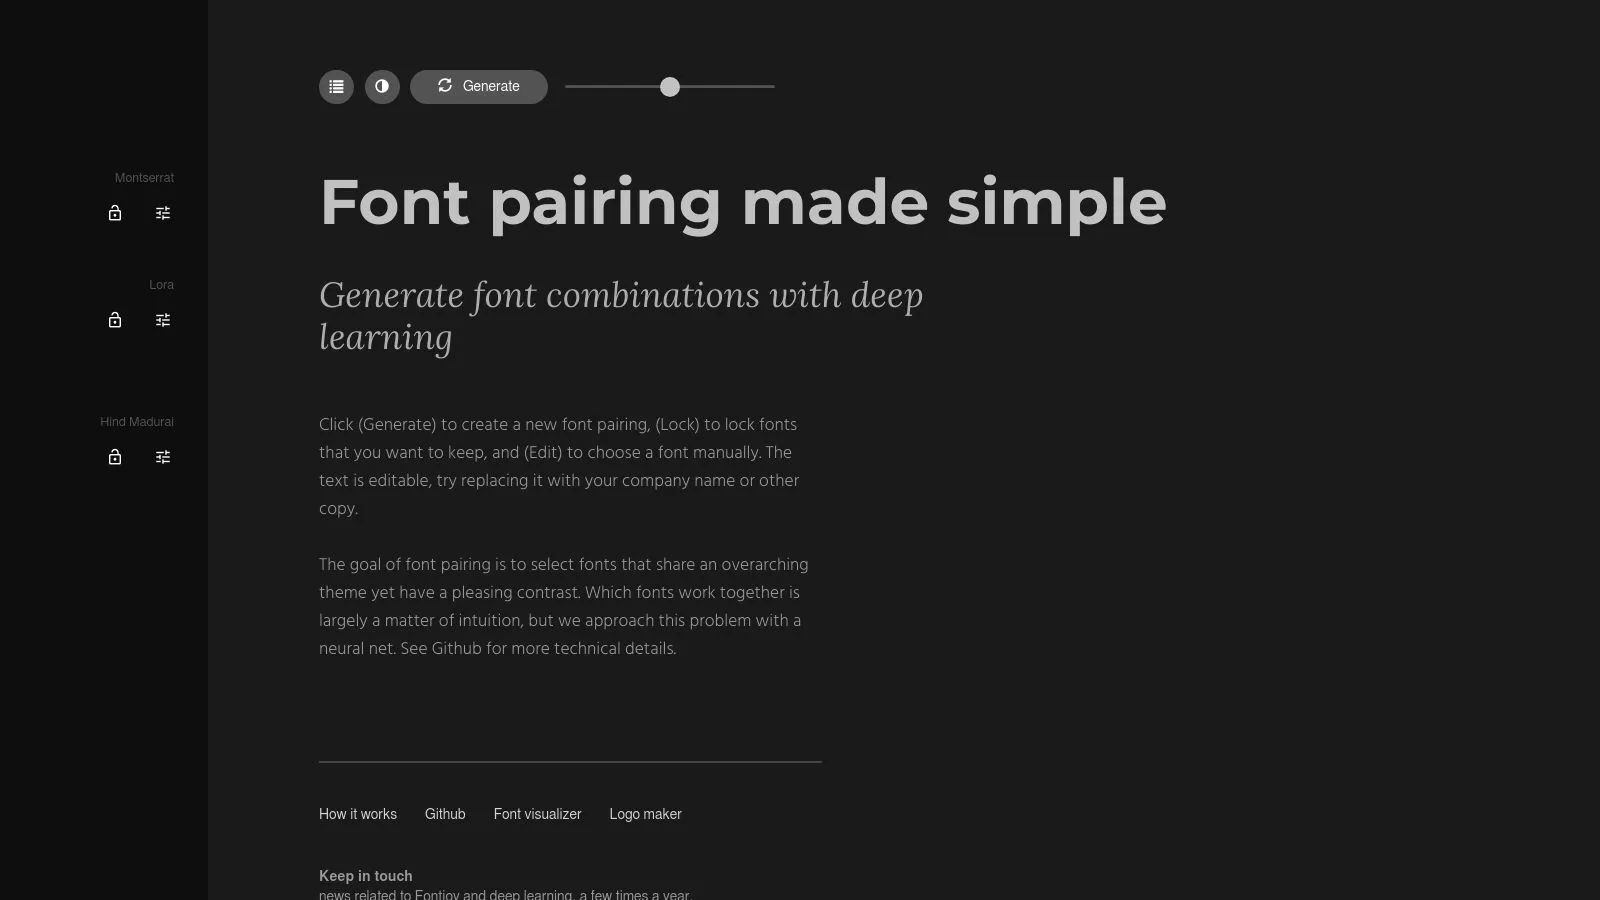 Featured image of Fontjoy website